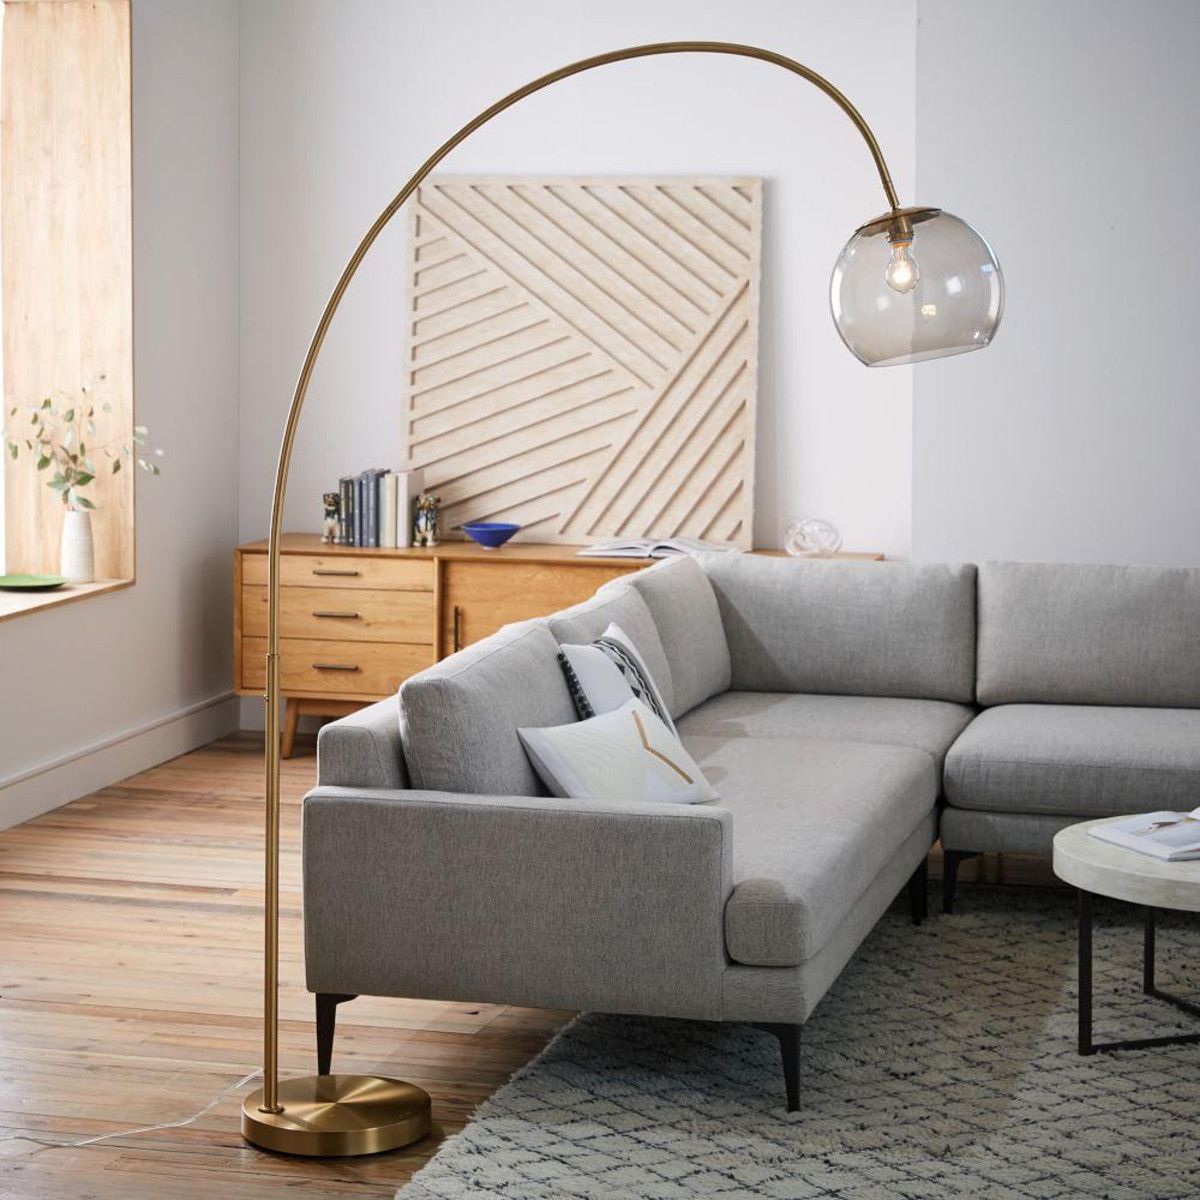 Overarching Floor Lamp Room Disacode Home Design From intended for dimensions 1200 X 1200